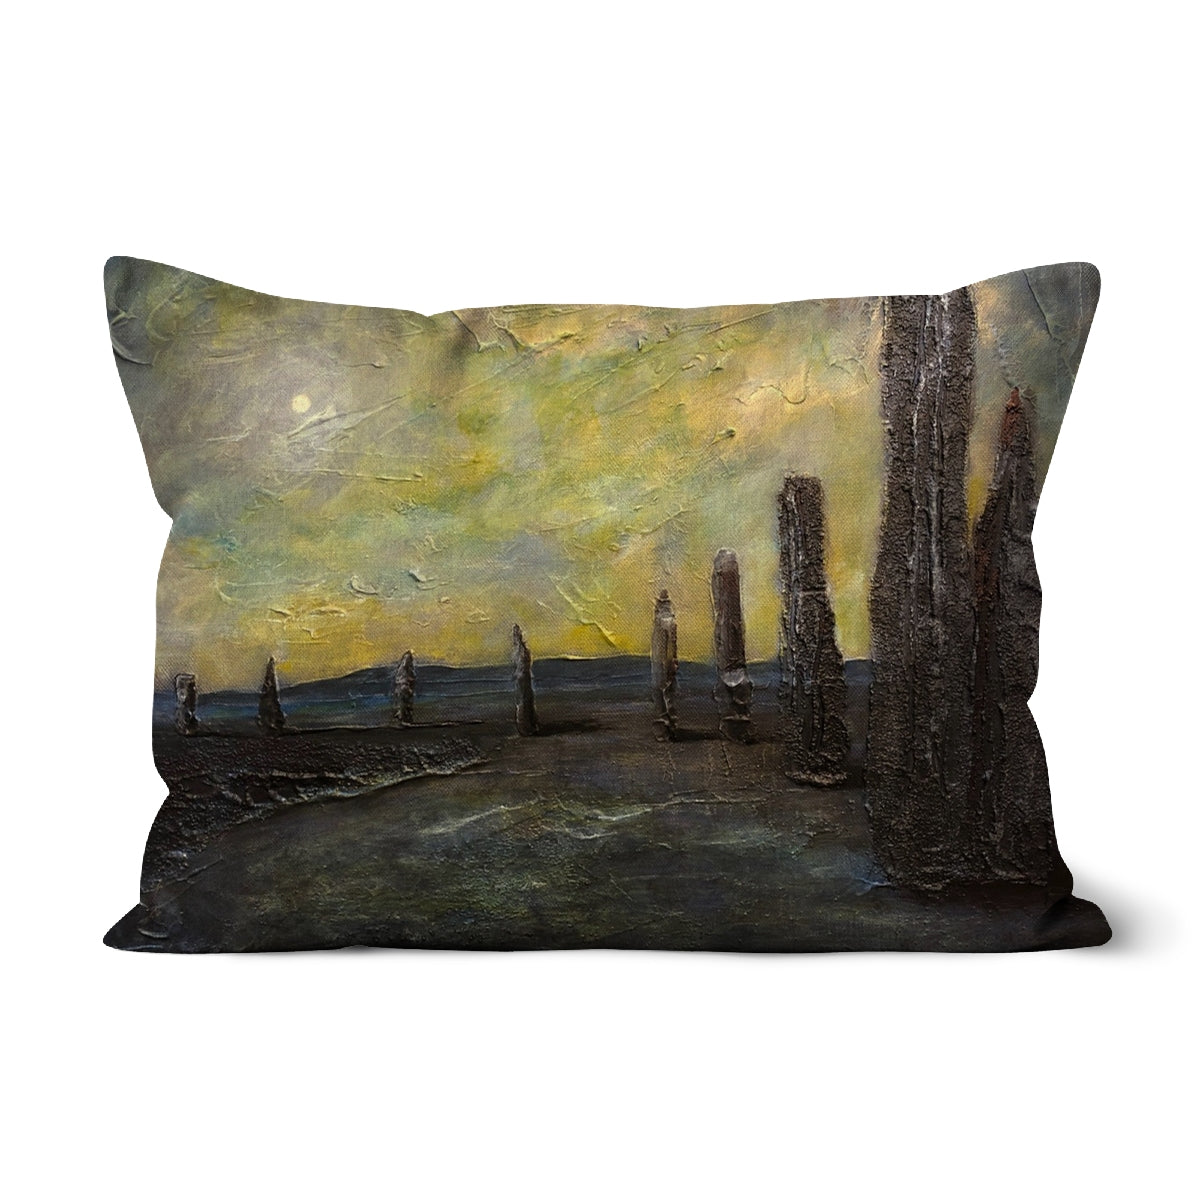 An Ethereal Ring Of Brodgar Art Gifts Cushion-Cushions-Orkney Art Gallery-Linen-19"x13"-Paintings, Prints, Homeware, Art Gifts From Scotland By Scottish Artist Kevin Hunter